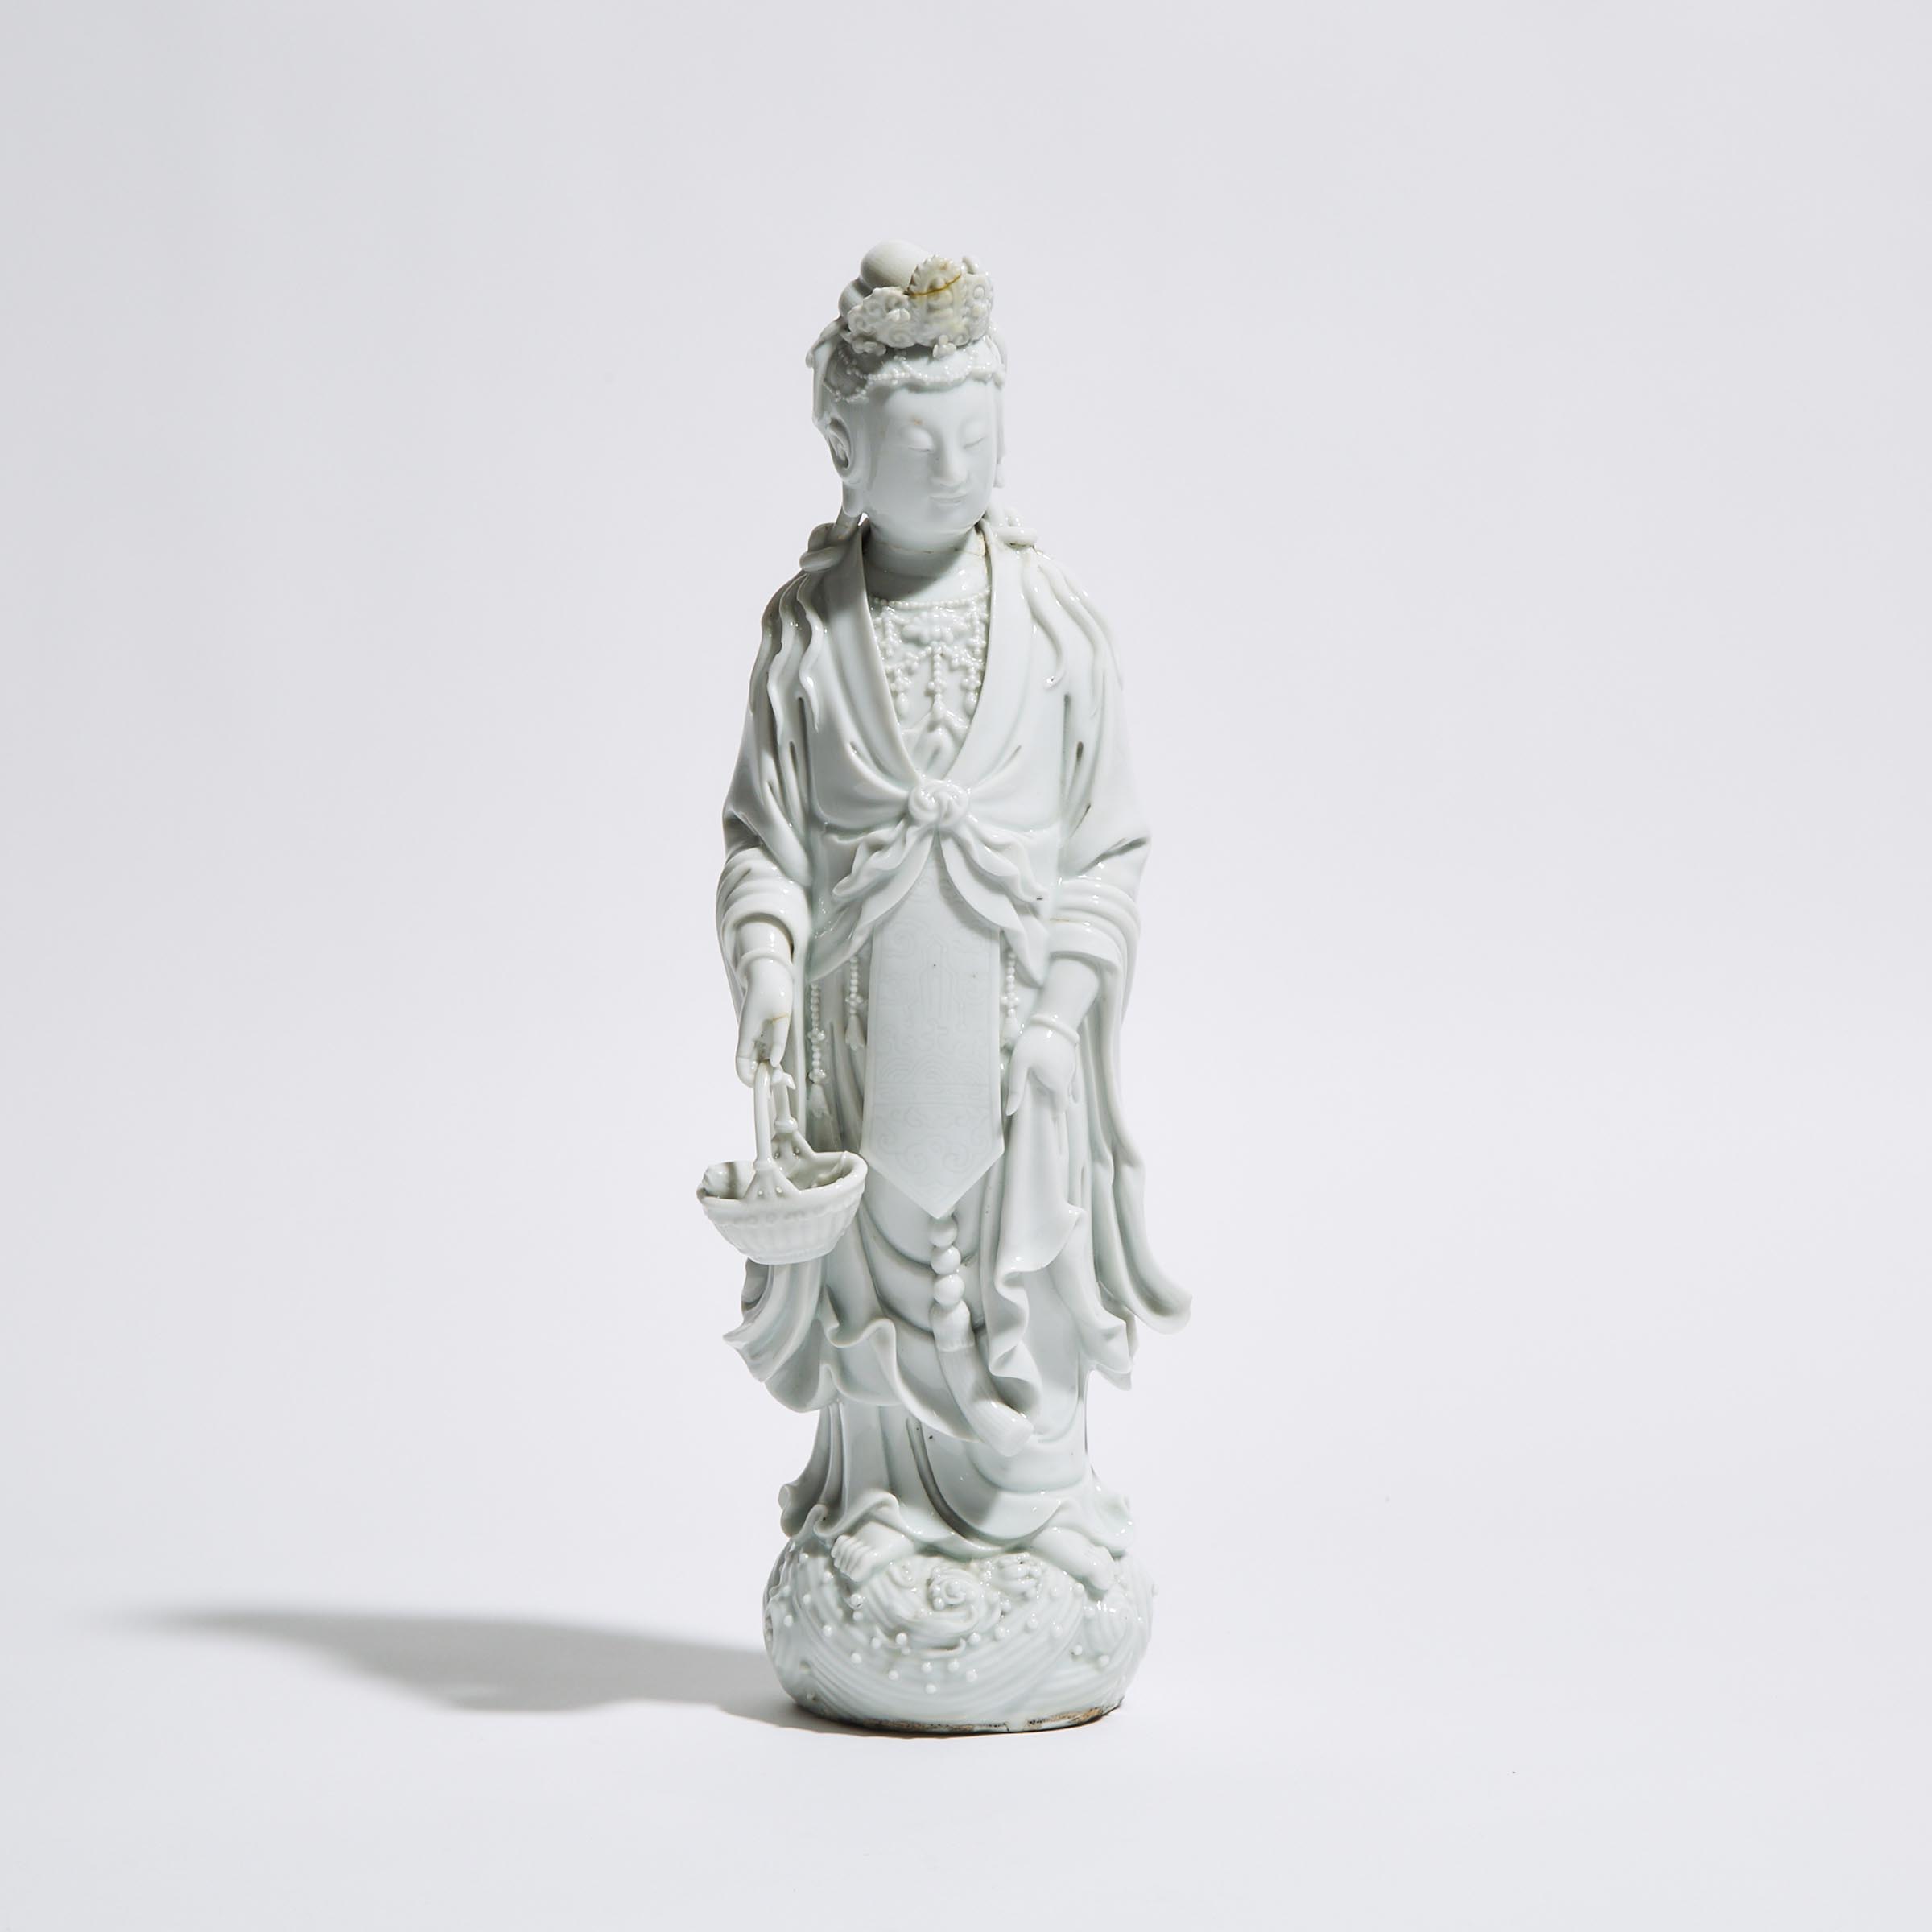 A Blanc de Chine Figure of Guanyin, Early 20th Century